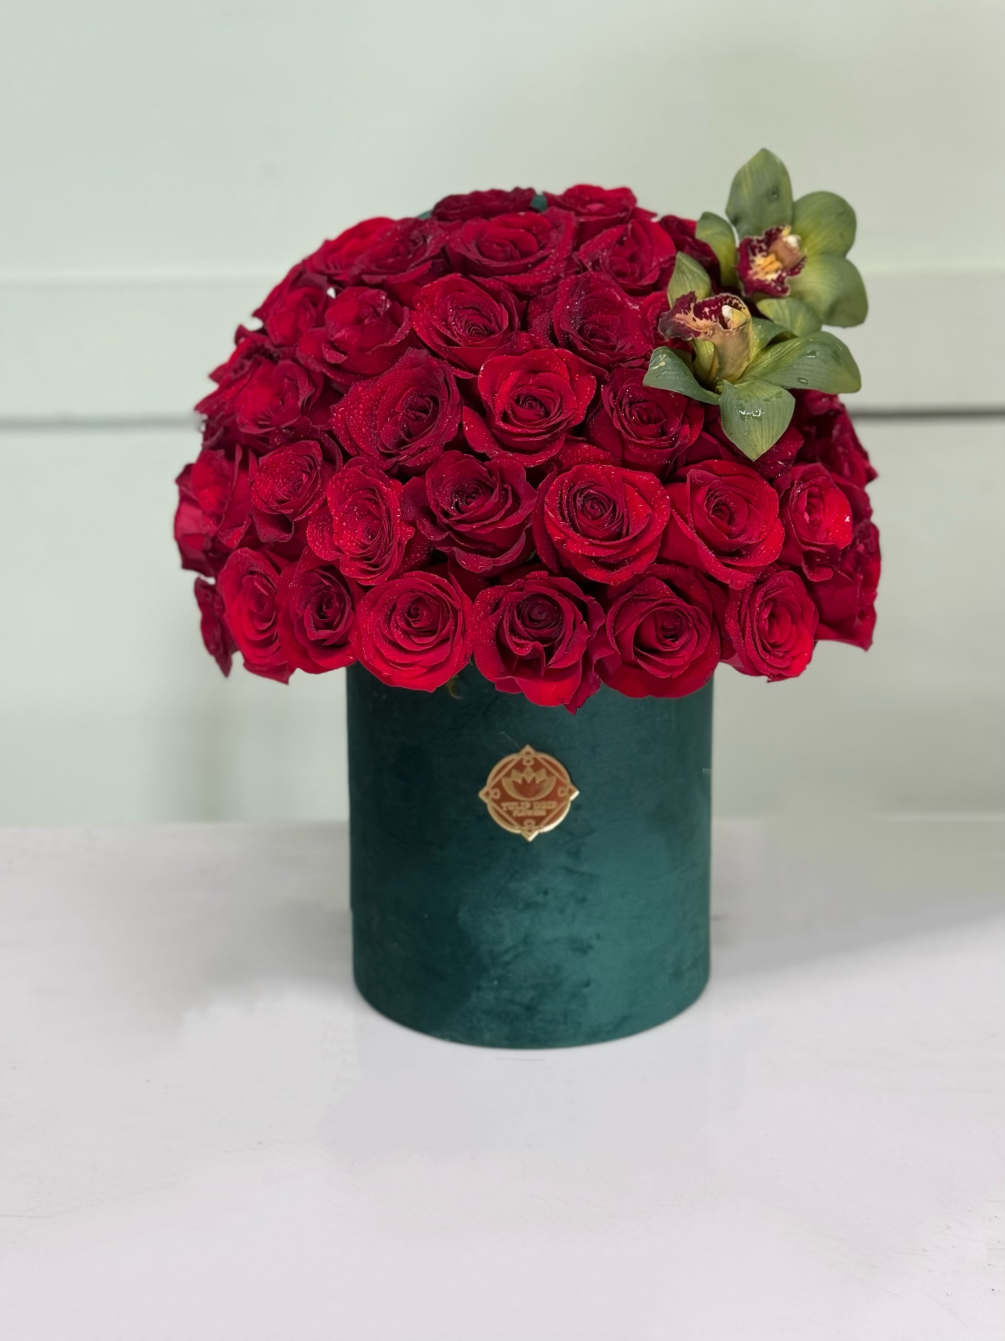 Red roses with Orchids in a velvet box . 
Standard 50 red